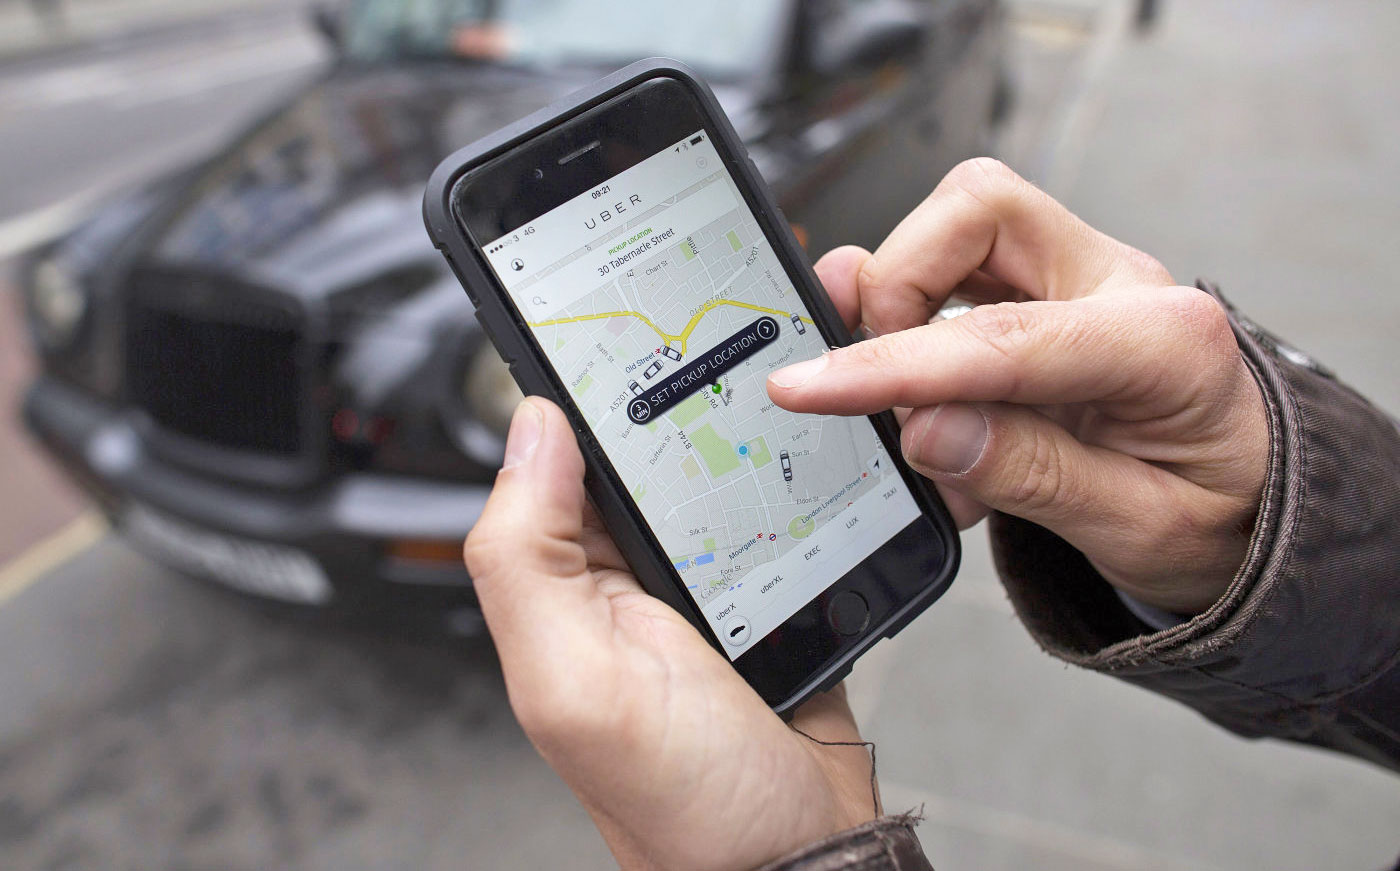 Uber is using Foursquare location data to help pick you up